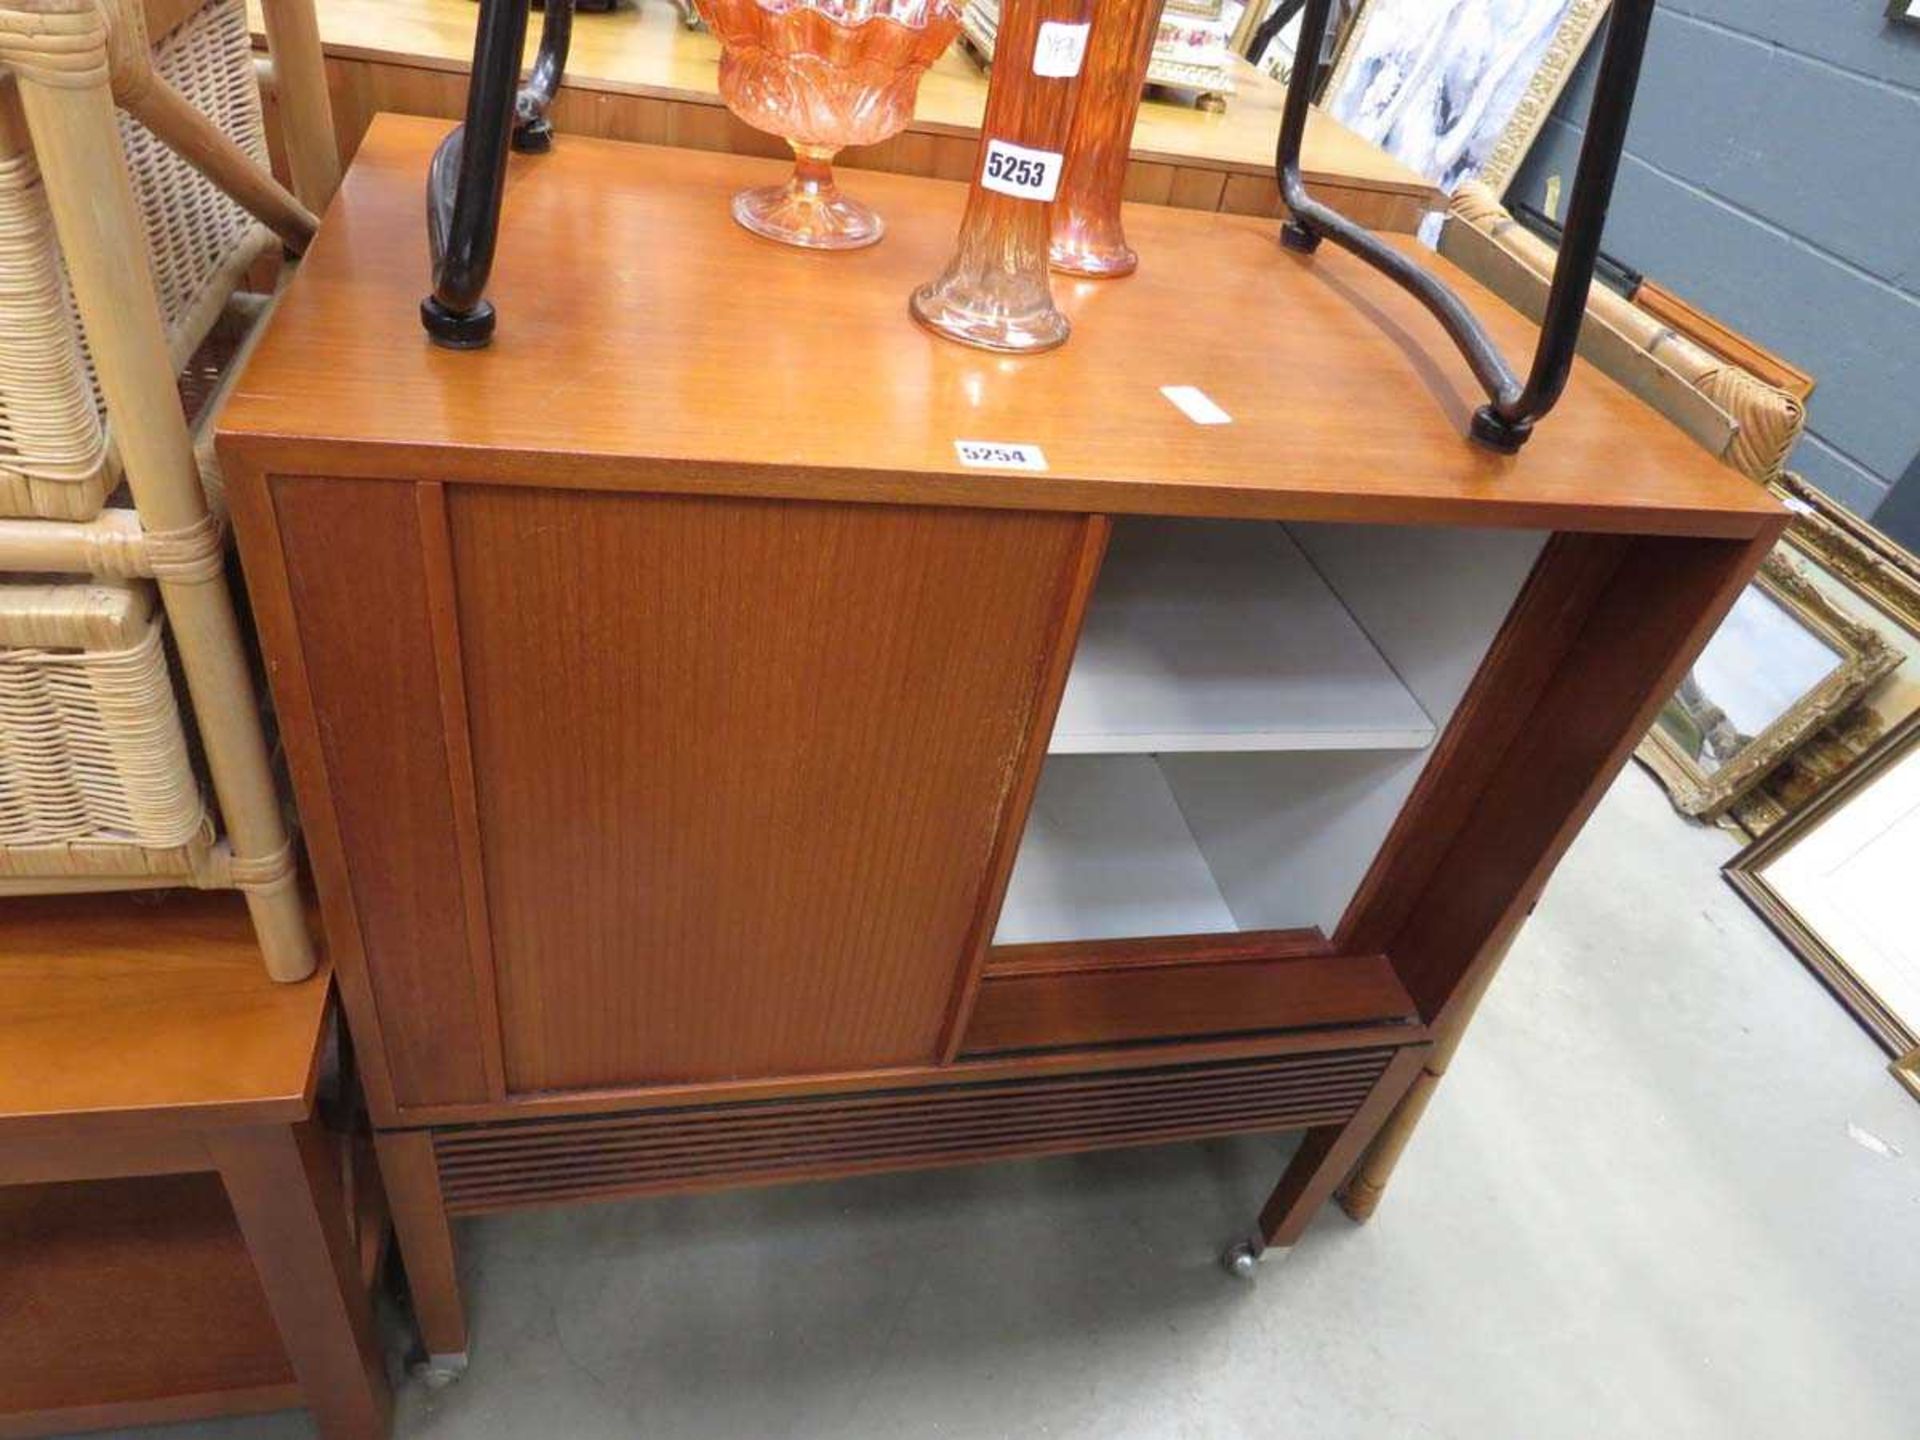 Tambour fronted cabinet